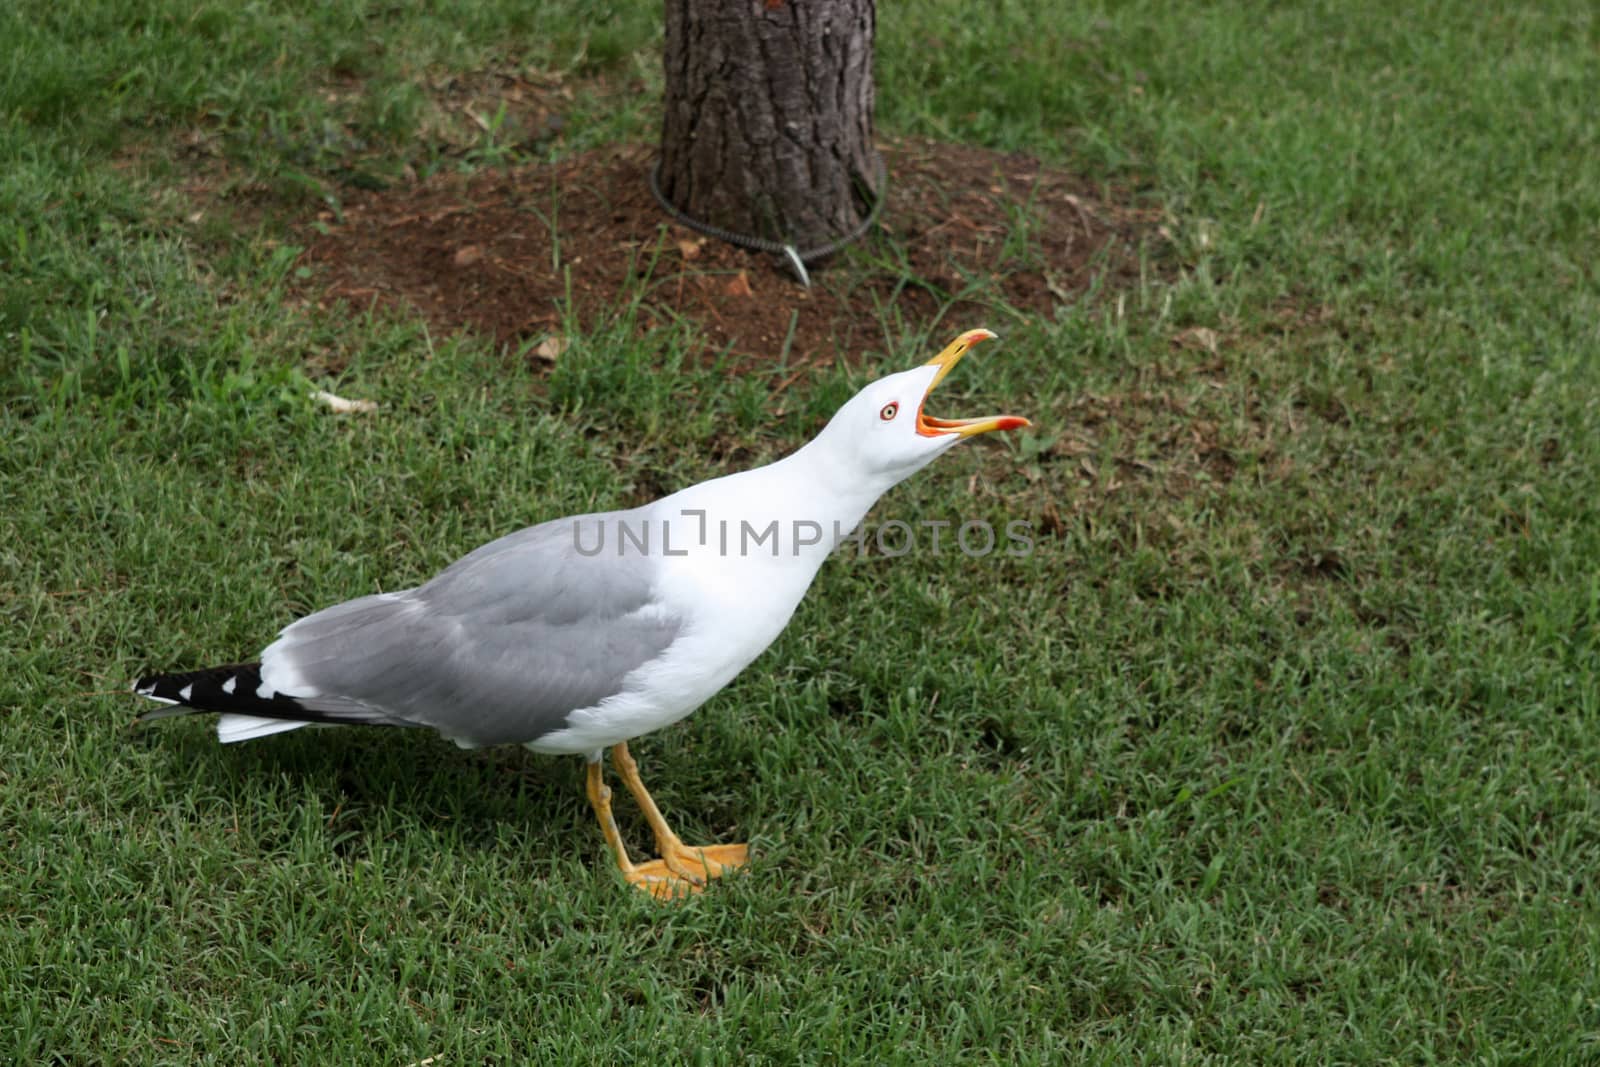 Seagull screaming standing on a lawn grass.